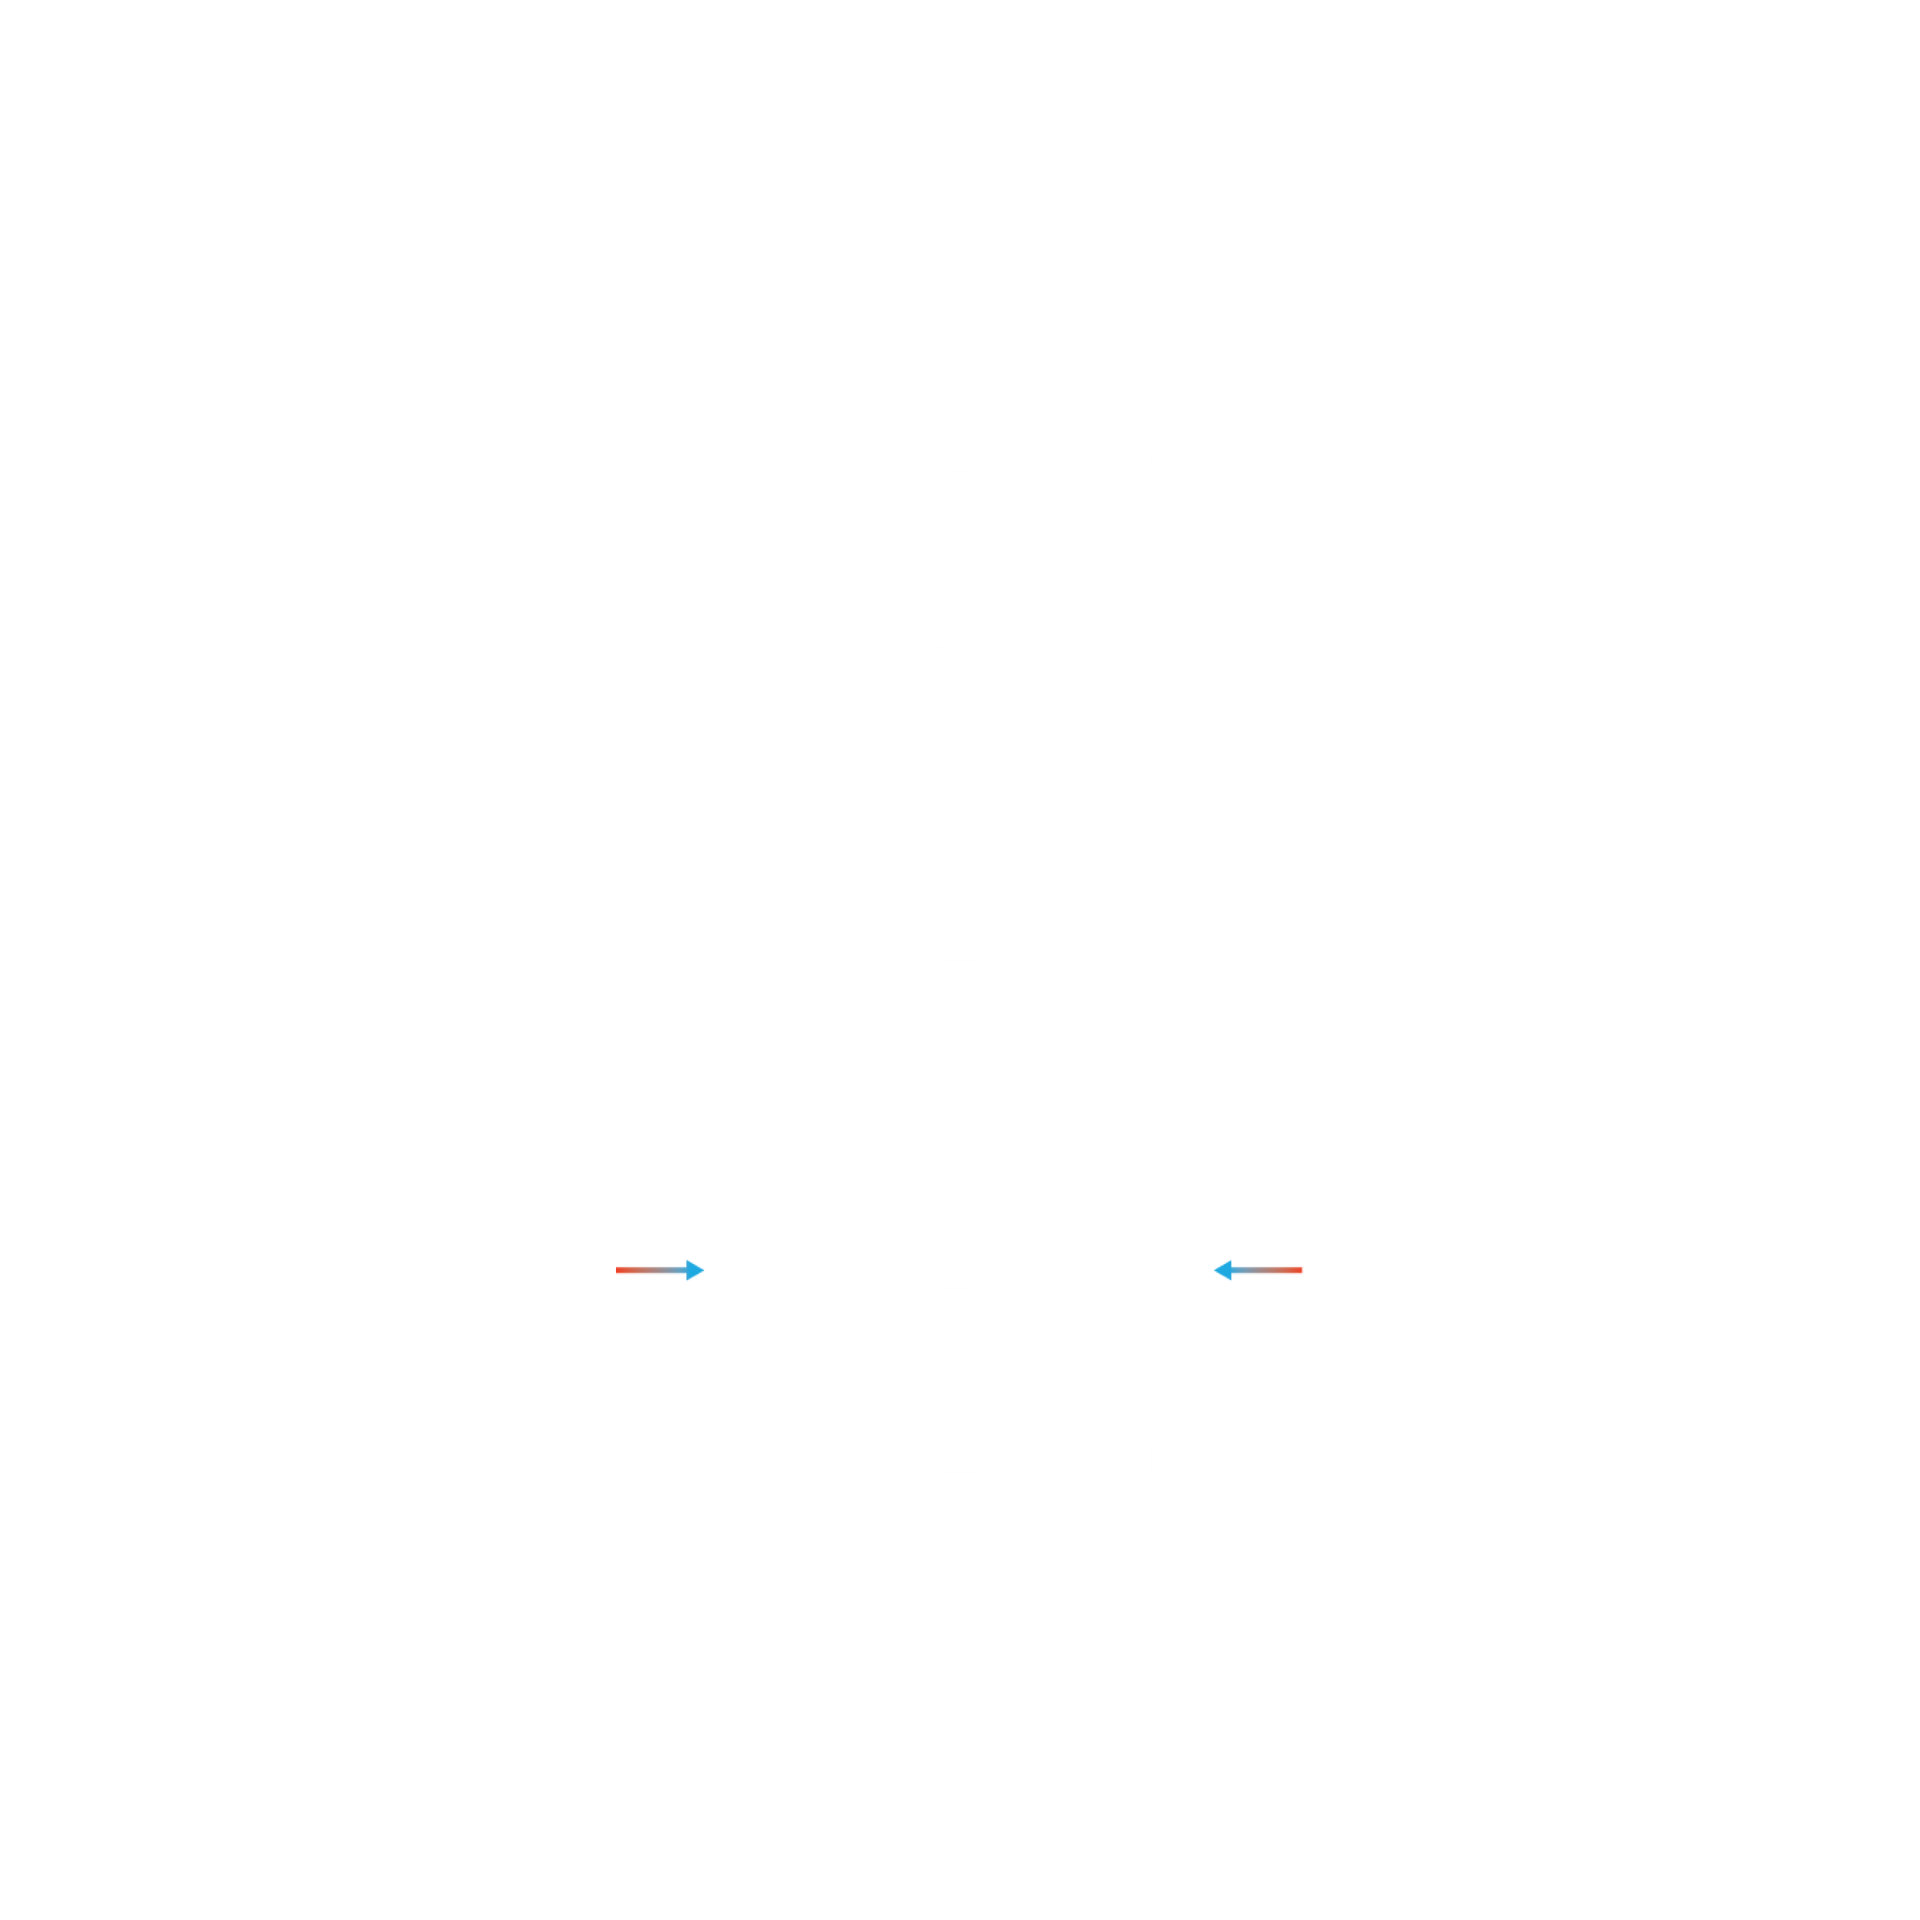 Cylindrical illustration showing spinal support on a black background.